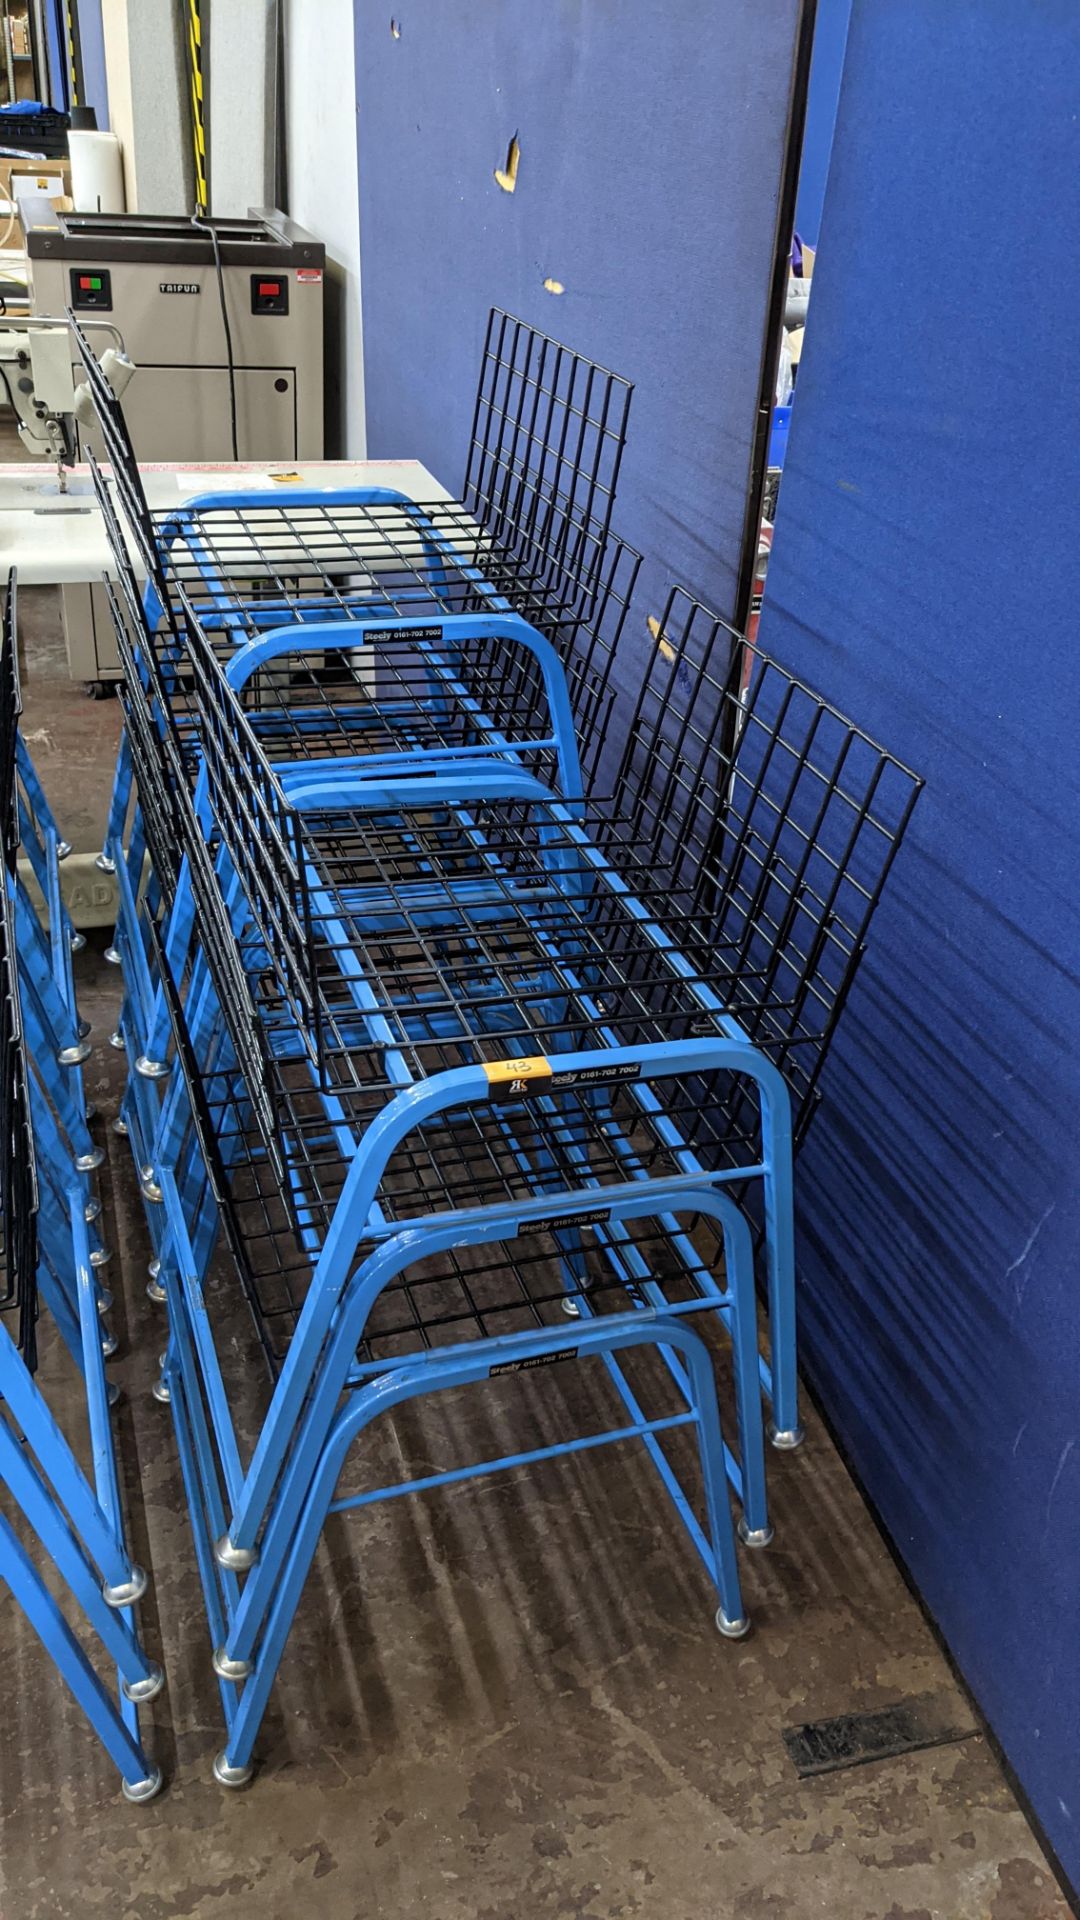 7 off matching blue stacking Steely mobile machinists baskets - Image 2 of 5